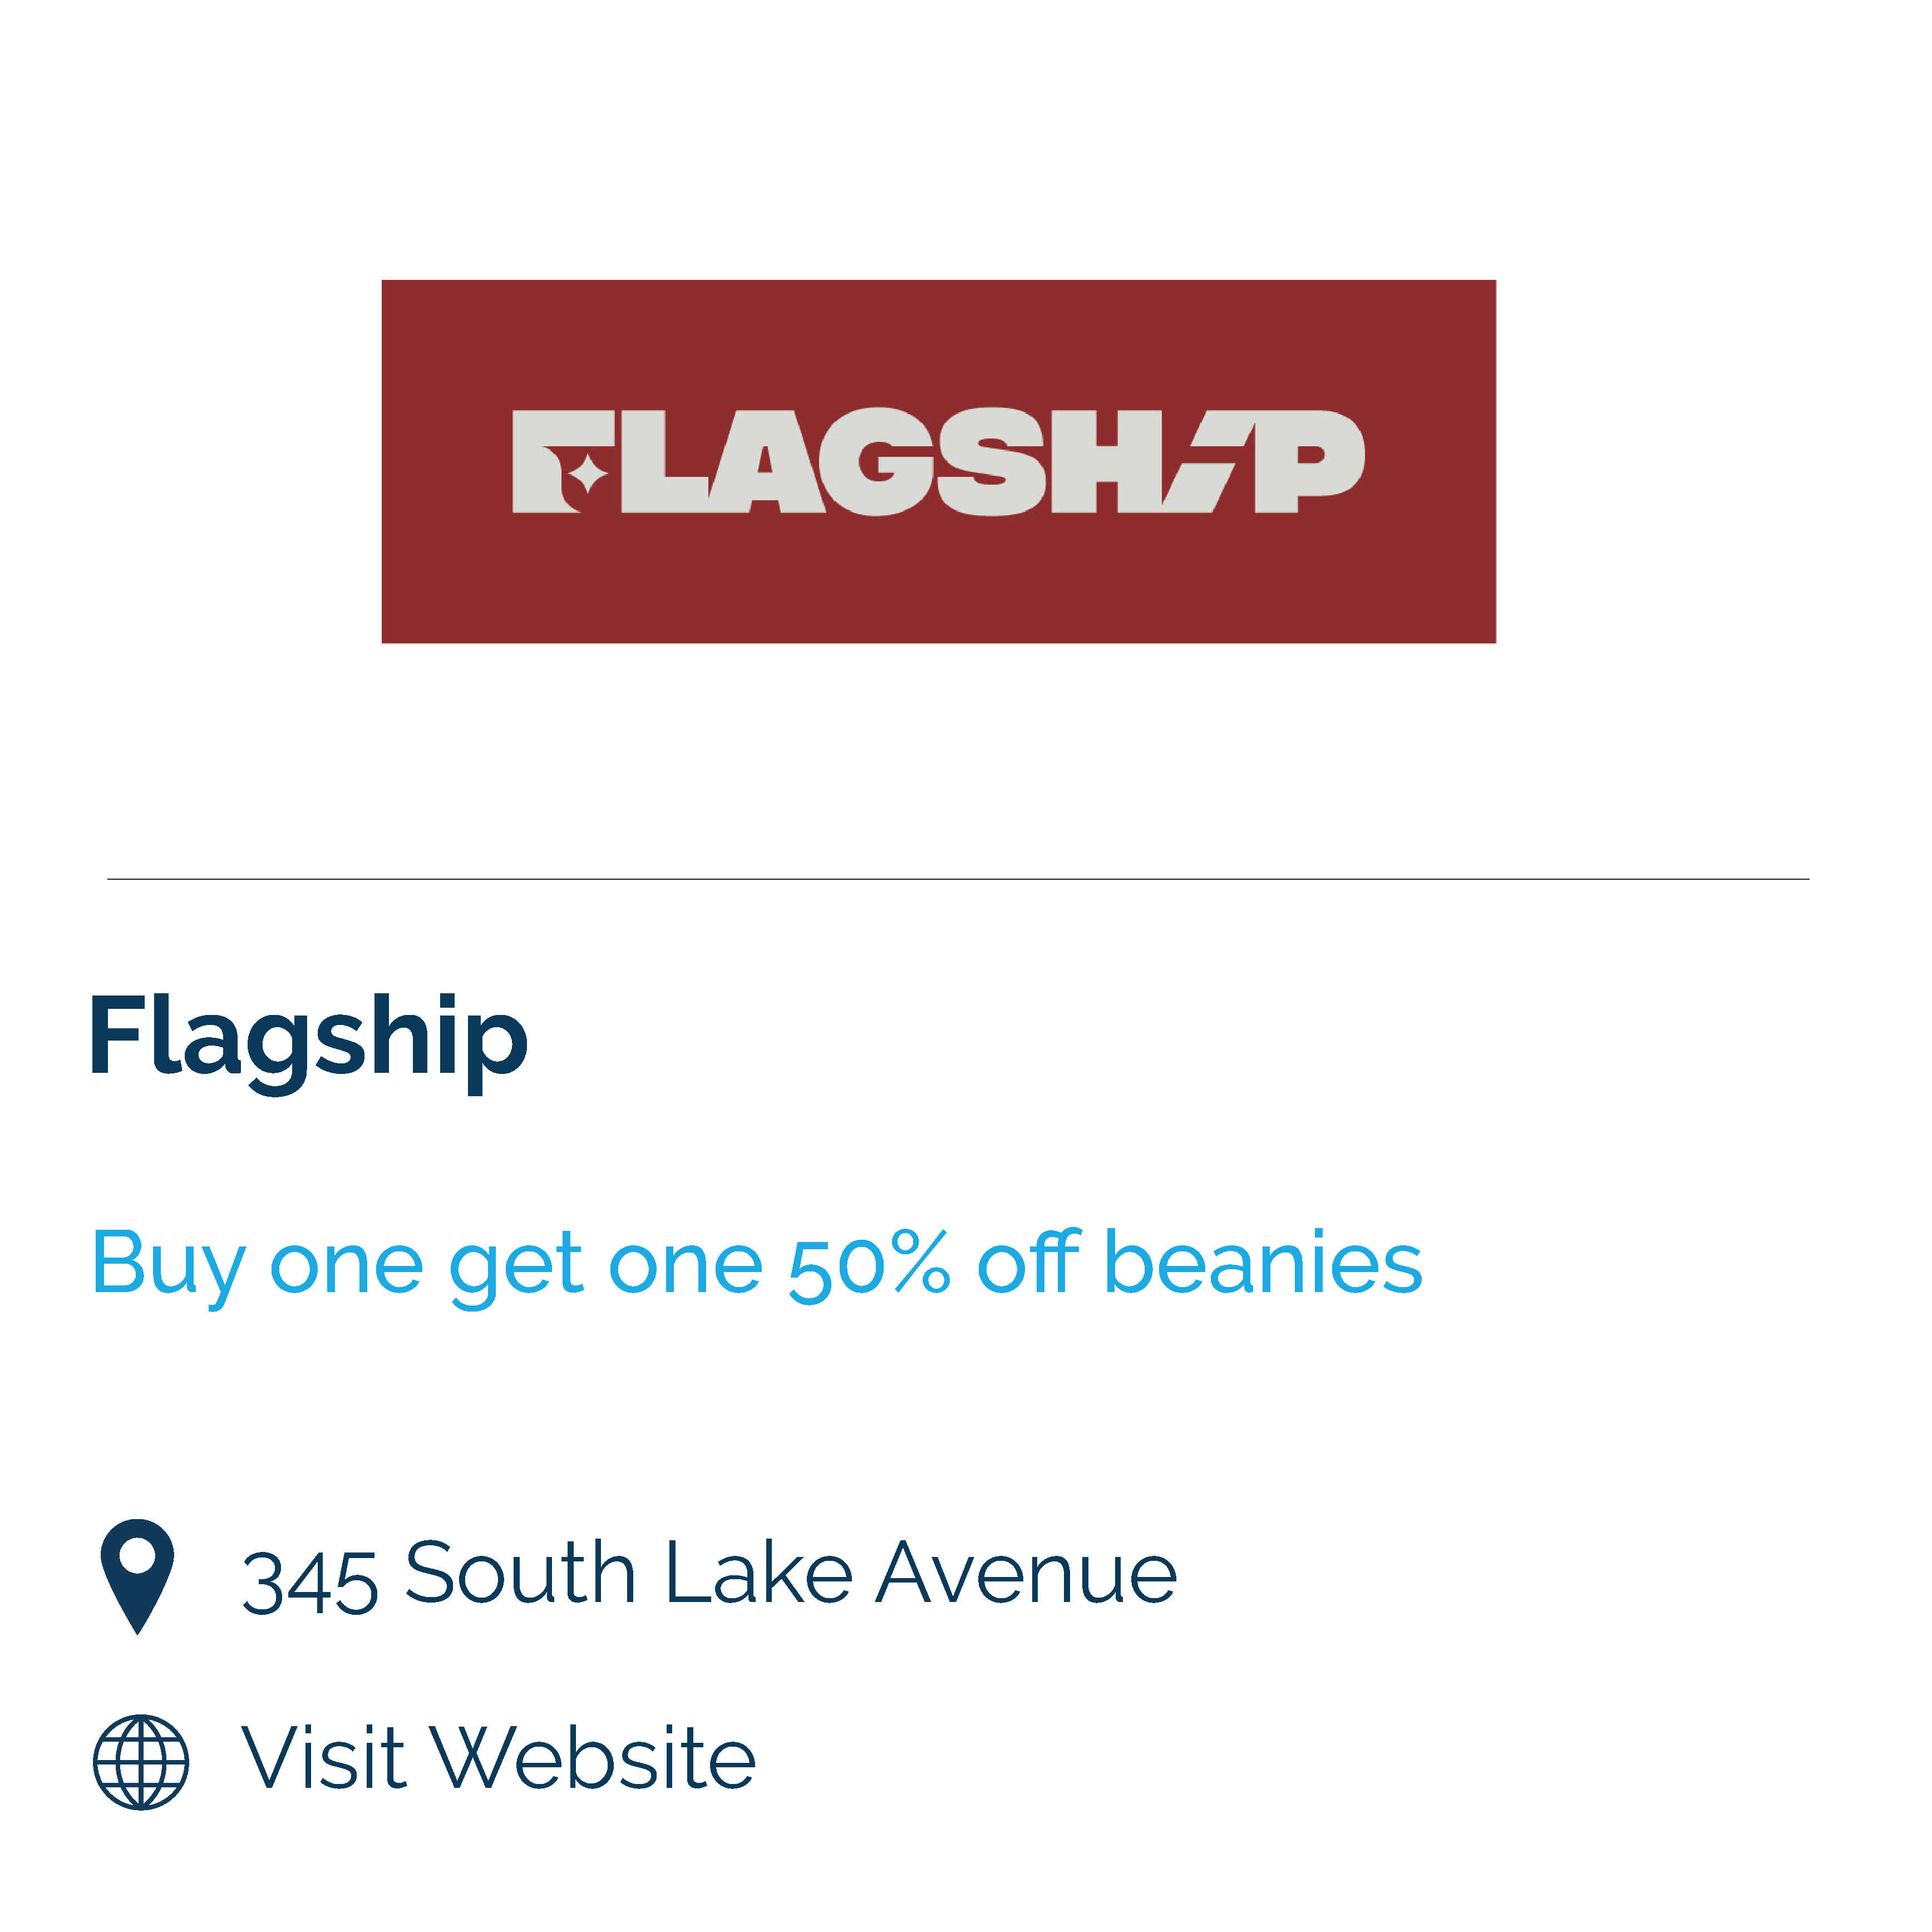 flagship. buy one get one 50% beanies. 345 south lake ave